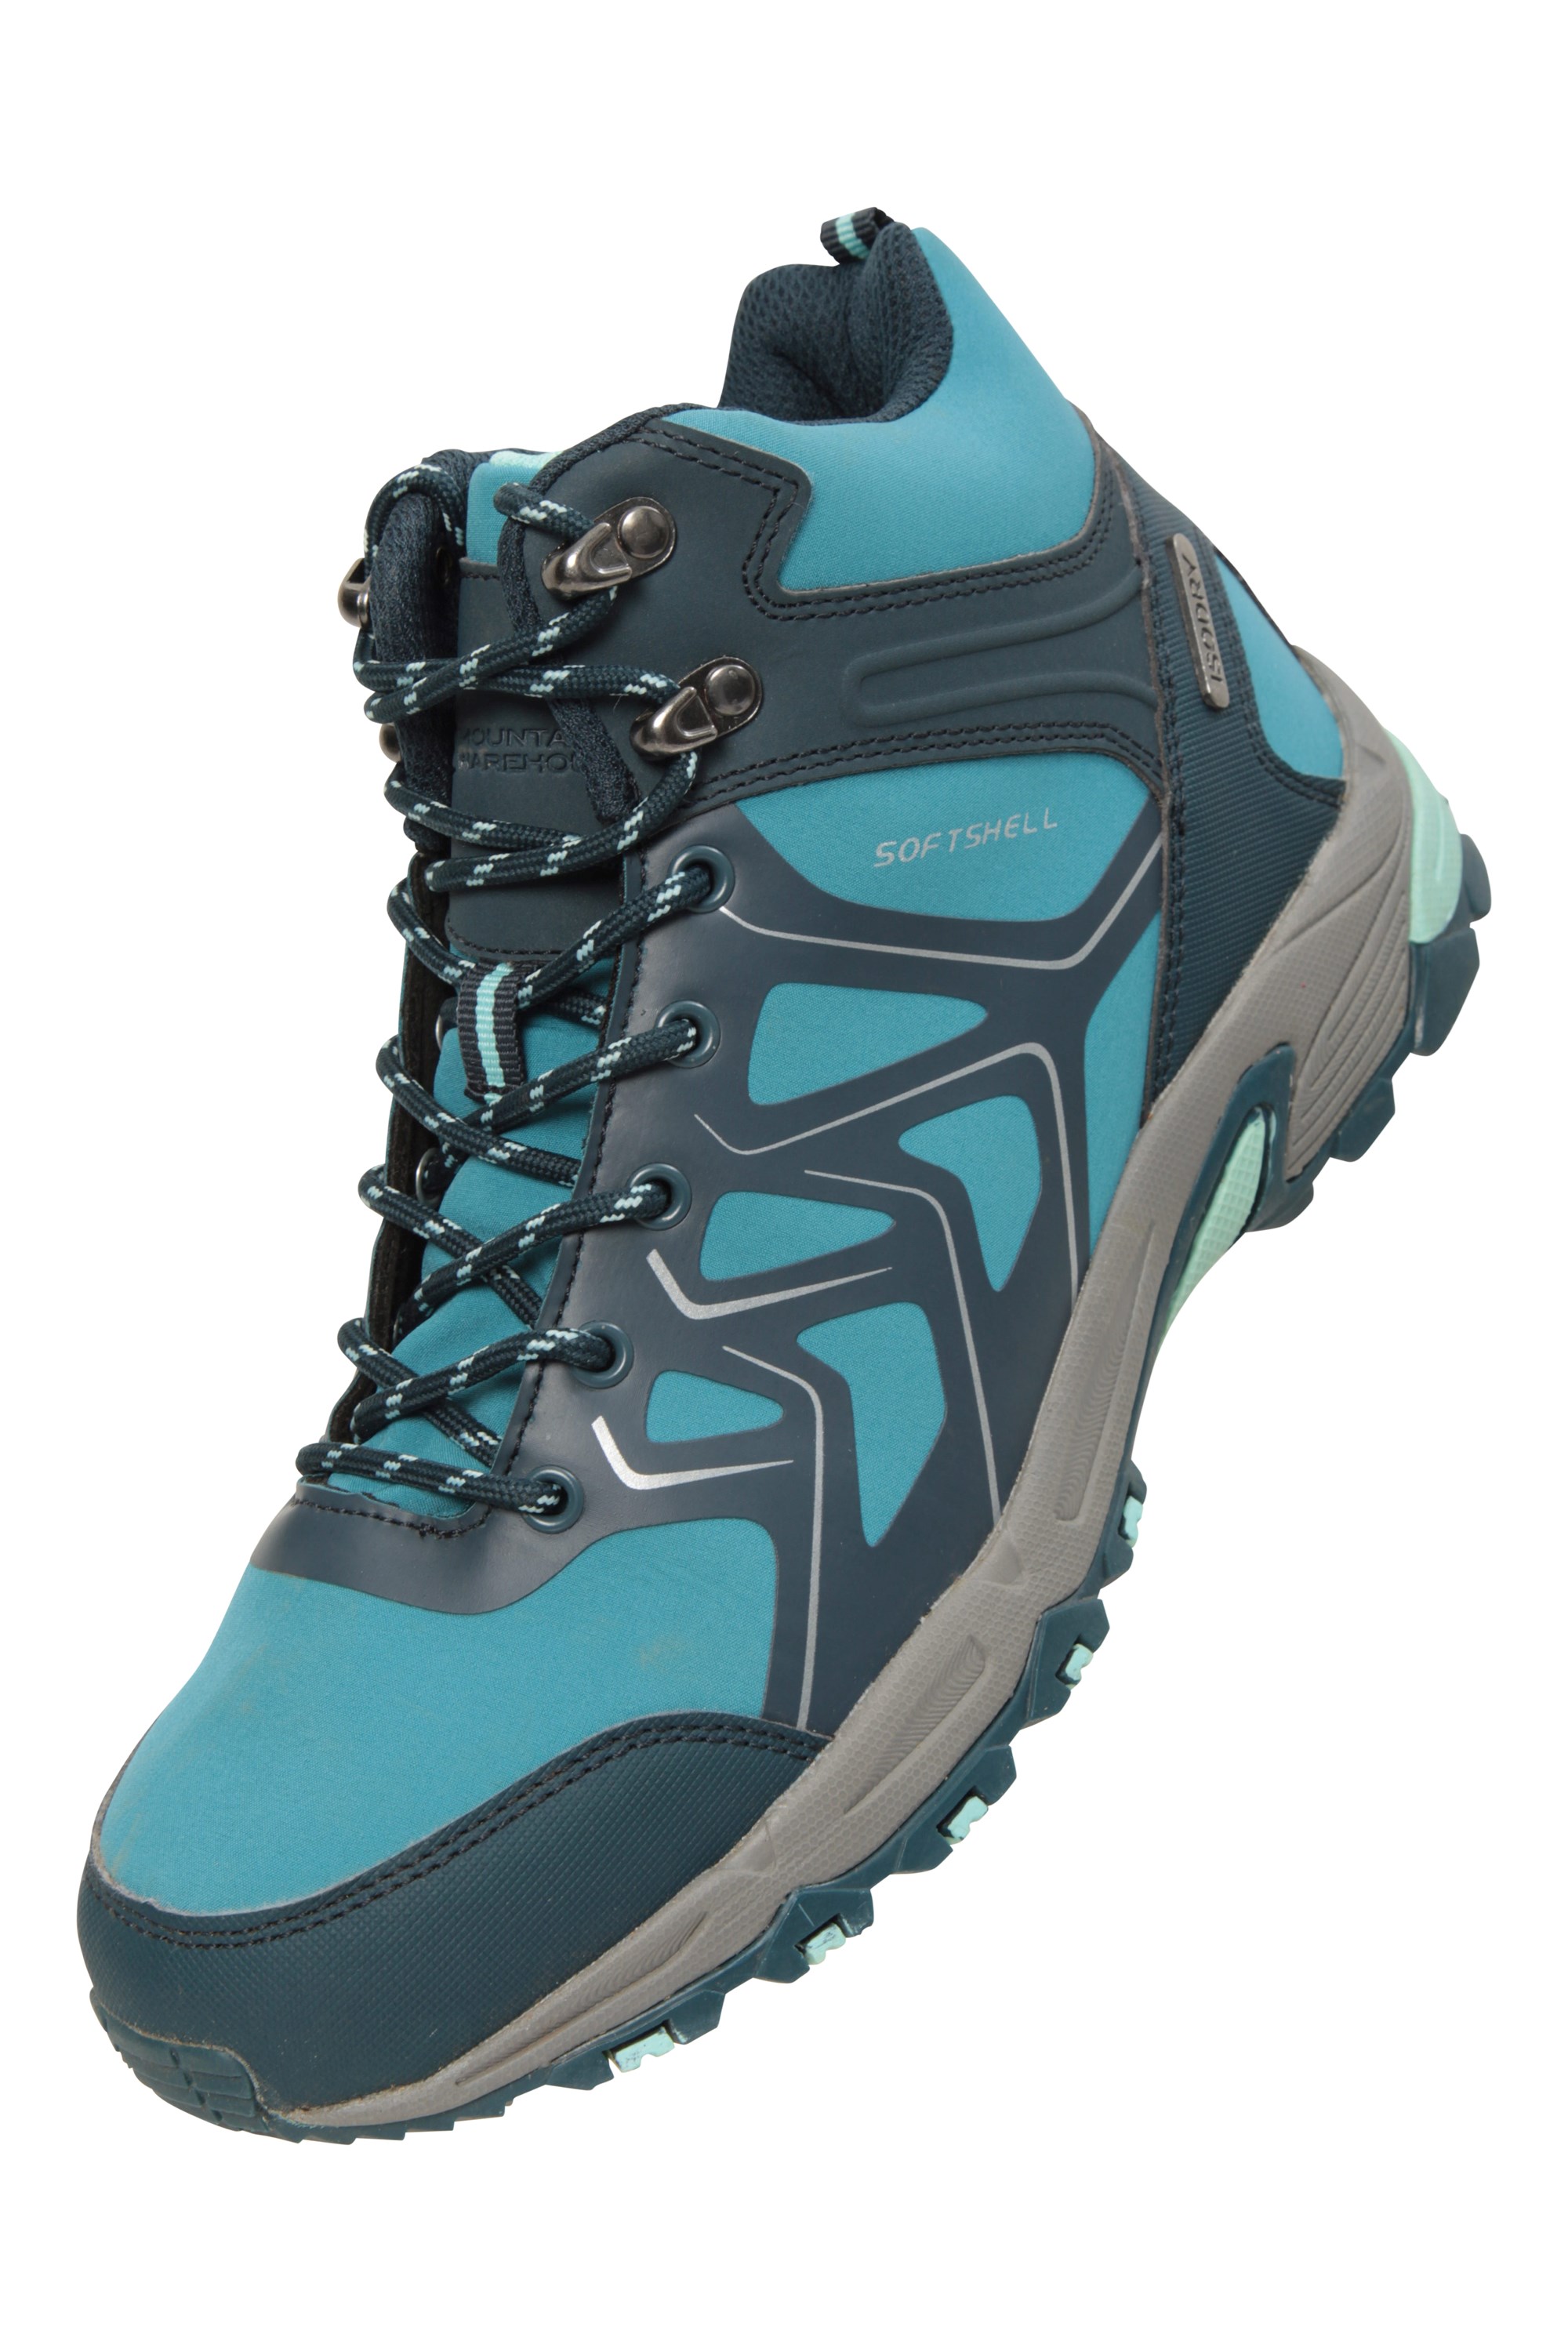 Mountain Warehouse Rubber Footwear With Mesh in Teal - Save 44% Blue Womens Shoes Boots Ankle boots 